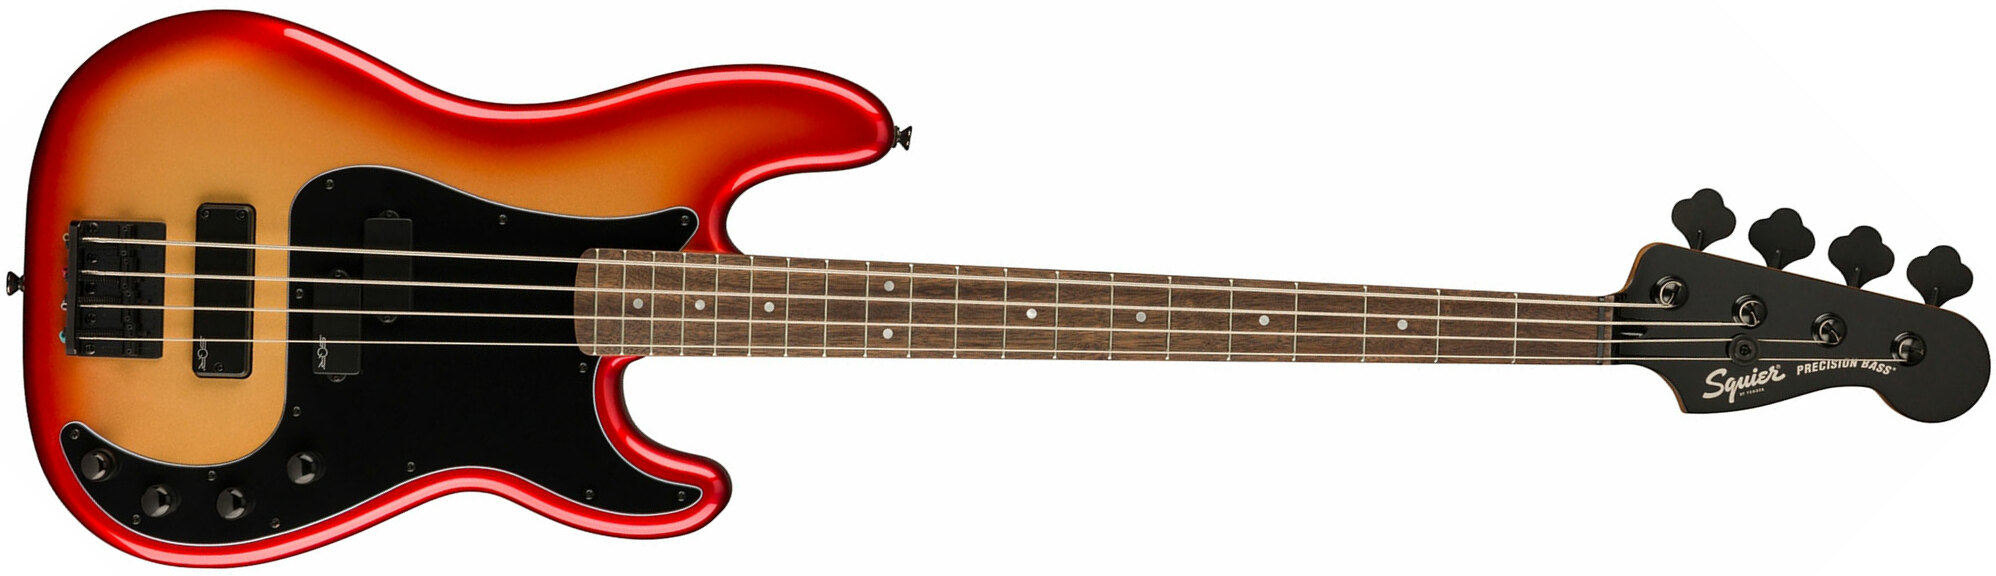 Squier Precision Bass Ph Contemporary Active Lau - Sunset Metallic - Solid body electric bass - Main picture